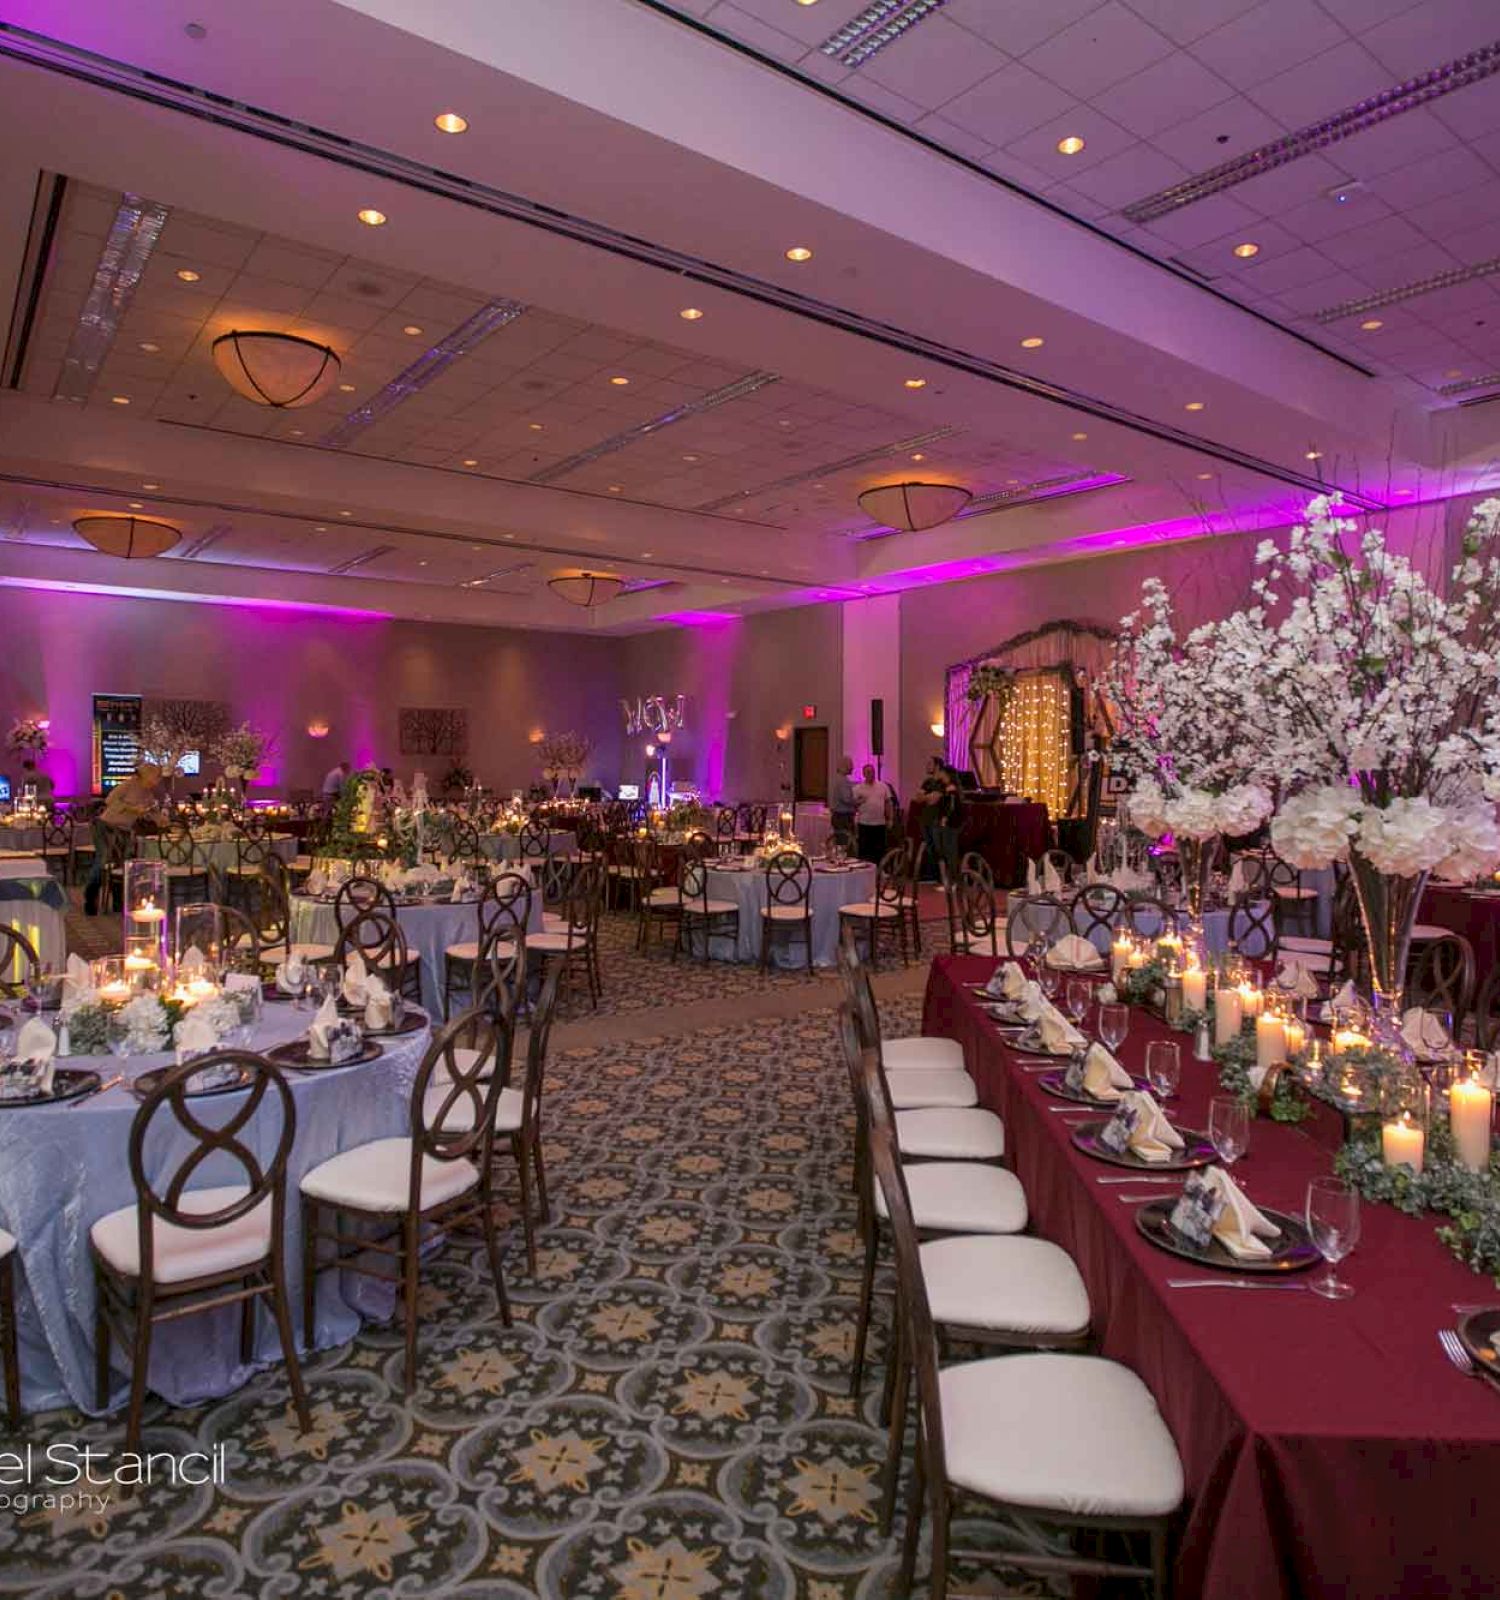 The image shows an elegantly decorated banquet hall with round and long tables adorned with flowers and candles, set up for an event.